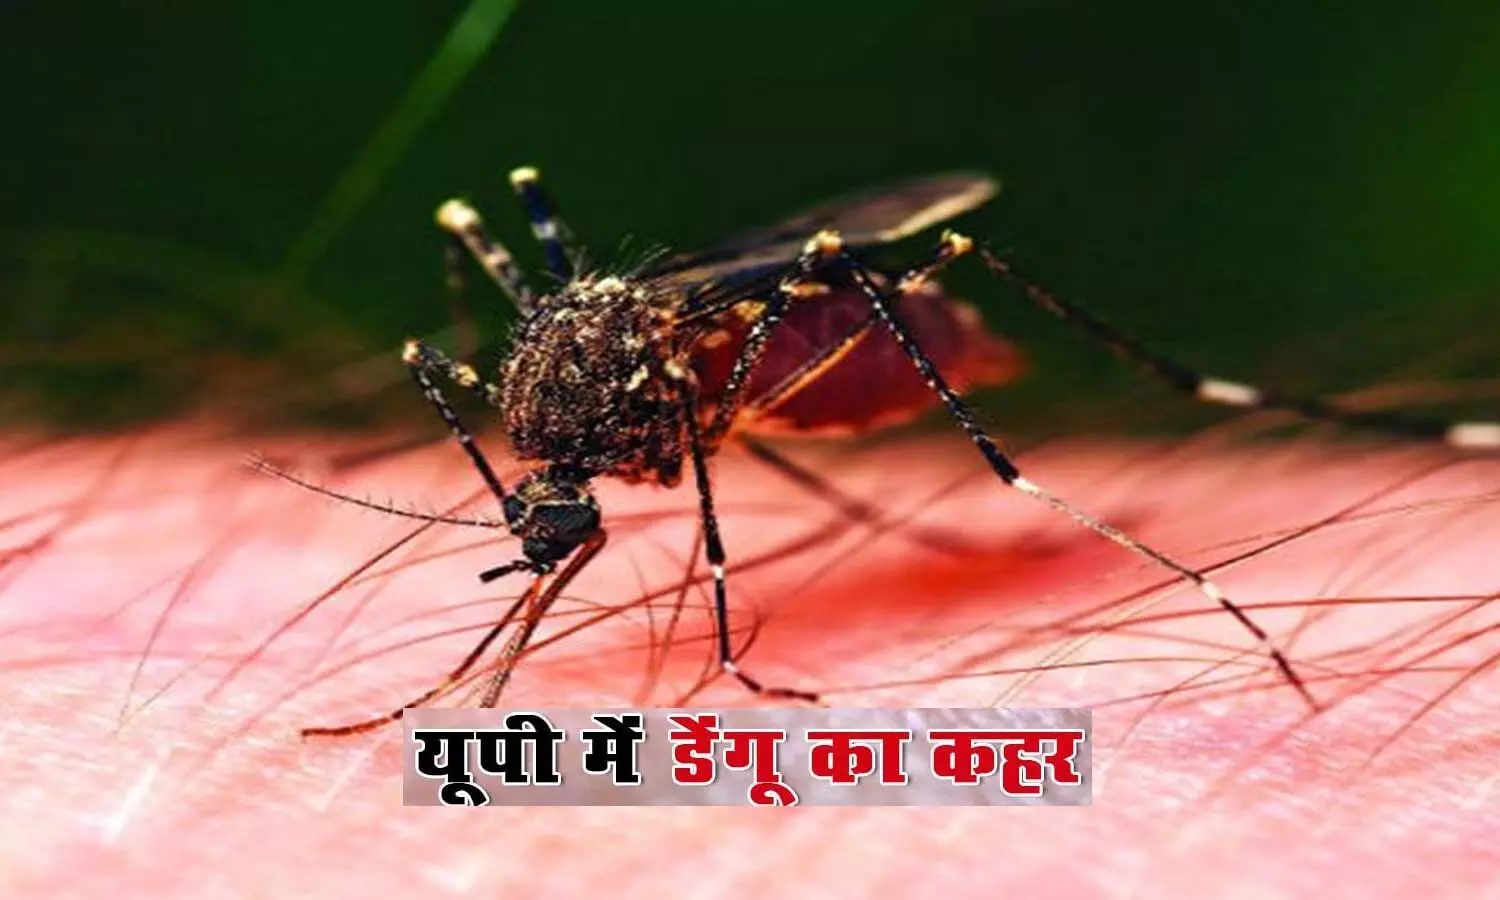 Highest number of cases found in a day, death due to Dengue Shock Syndrome